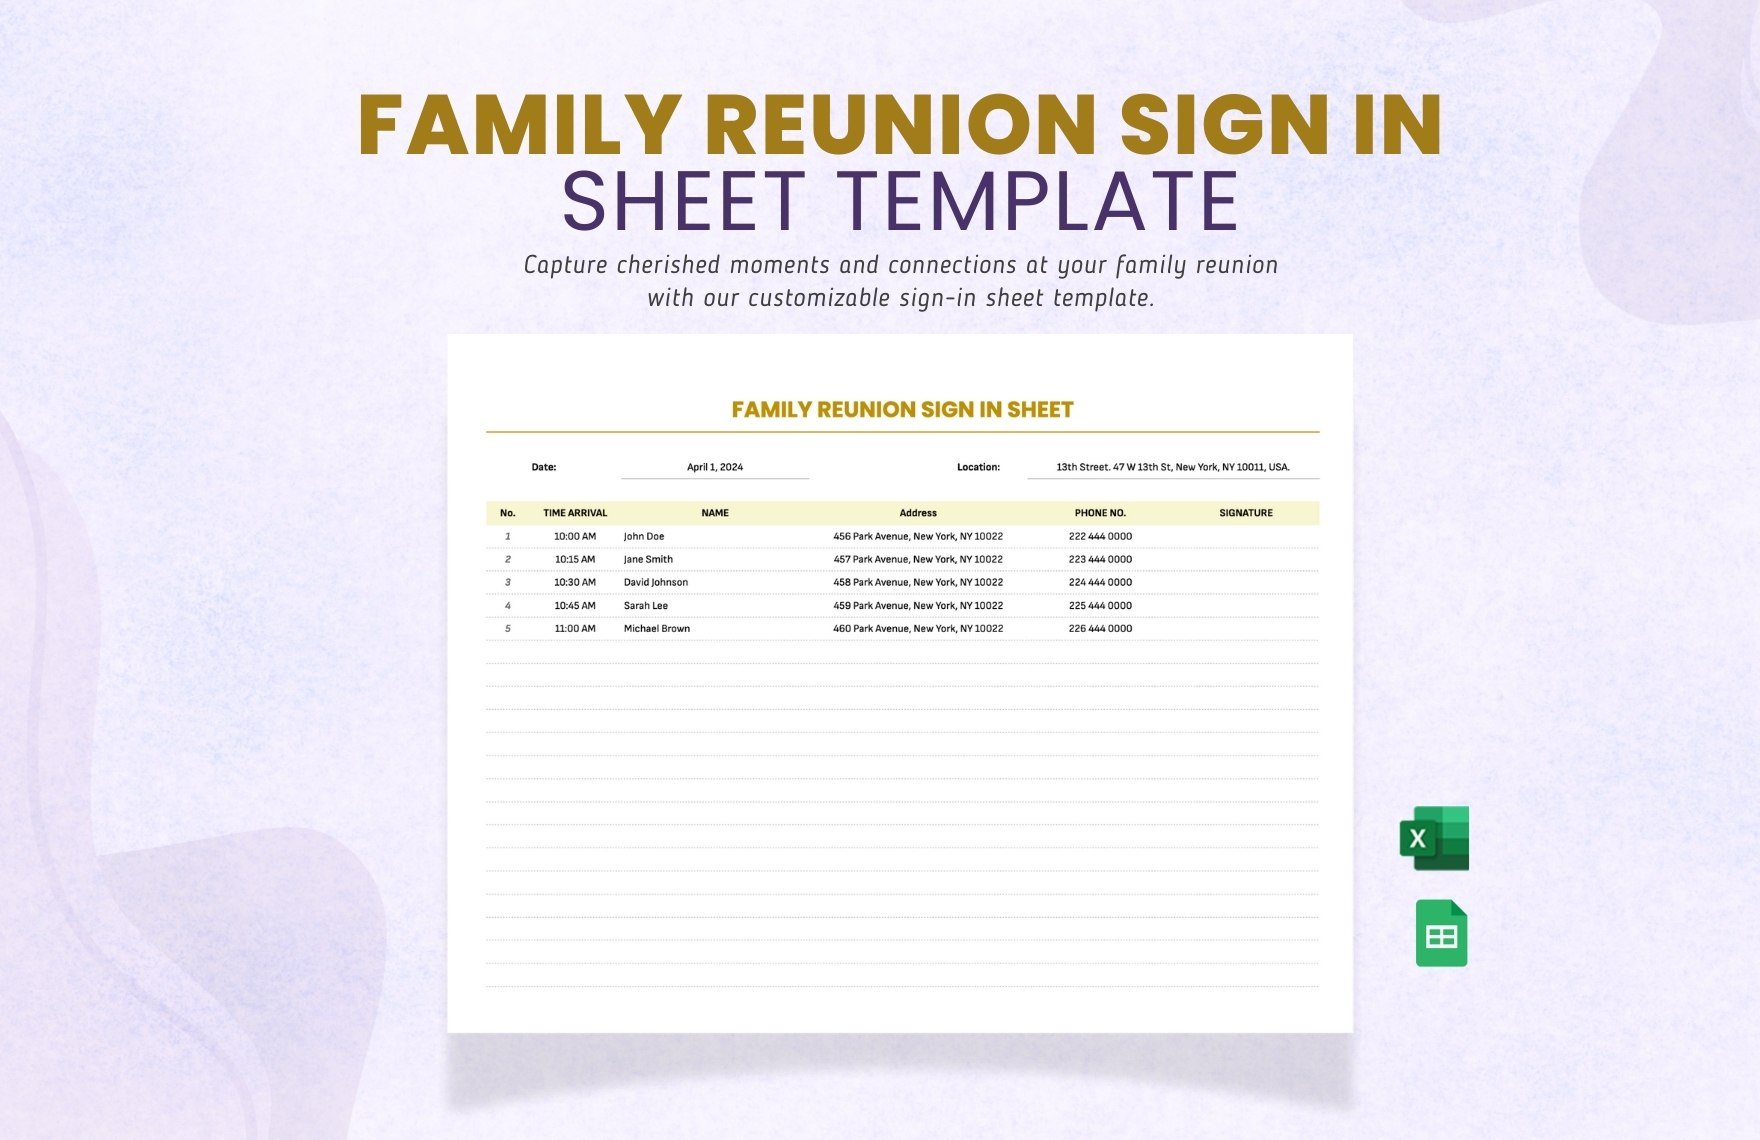 Family Reunion Sign in Sheet Template